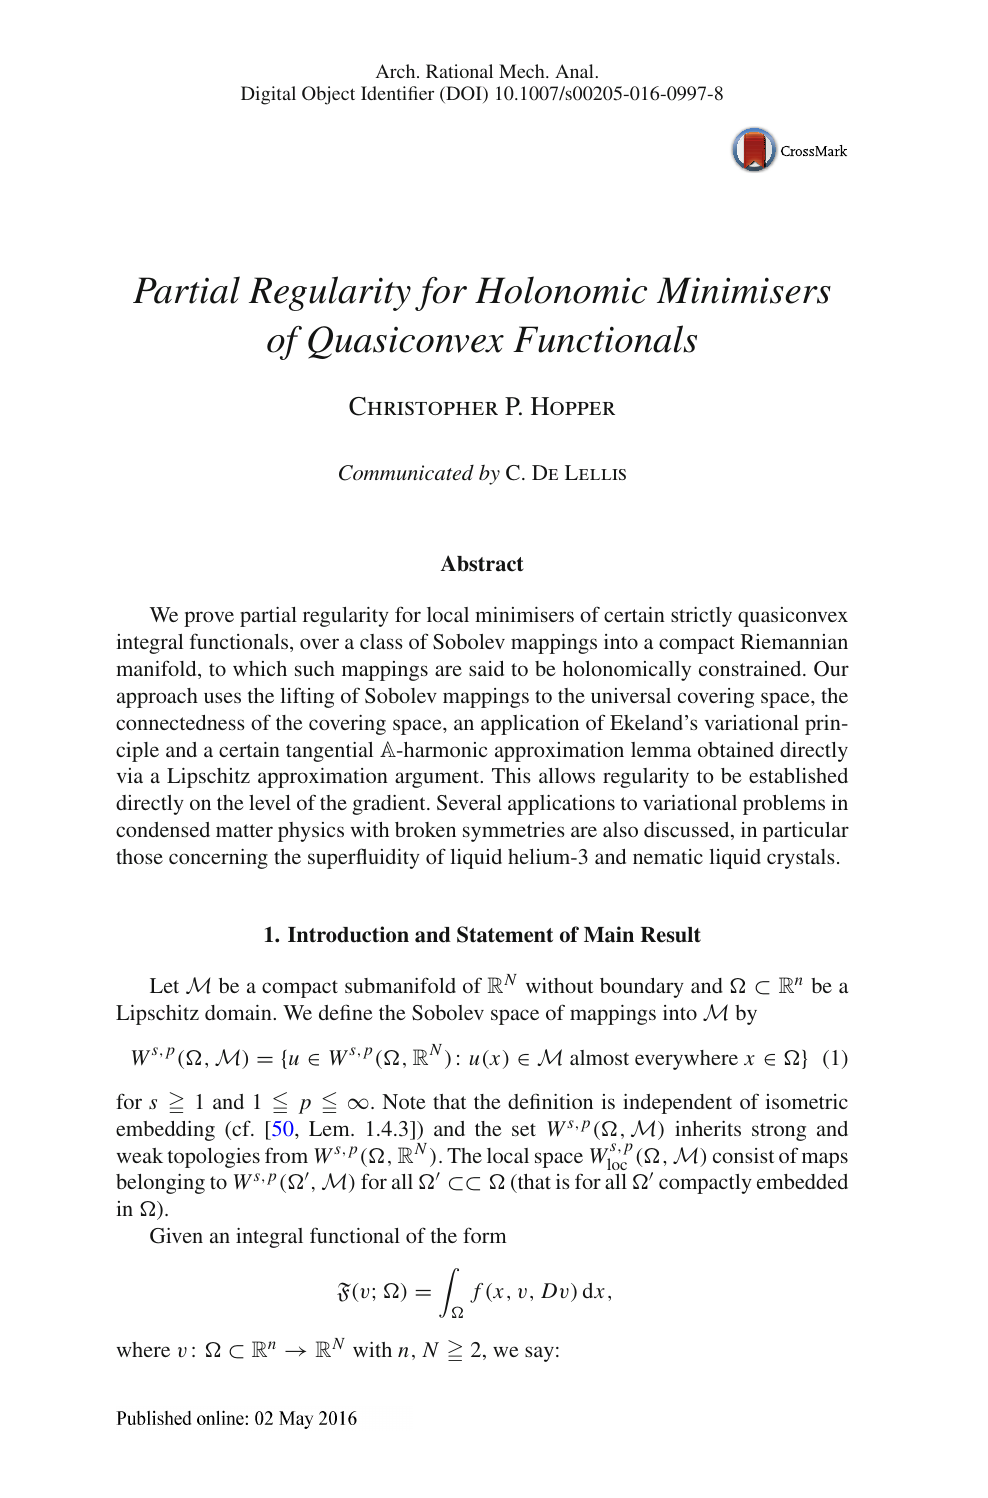 Partial Regularity For Holonomic Minimisers Of Quasiconvex Functionals Topic Of Research Paper In Mathematics Download Scholarly Article Pdf And Read For Free On Cyberleninka Open Science Hub